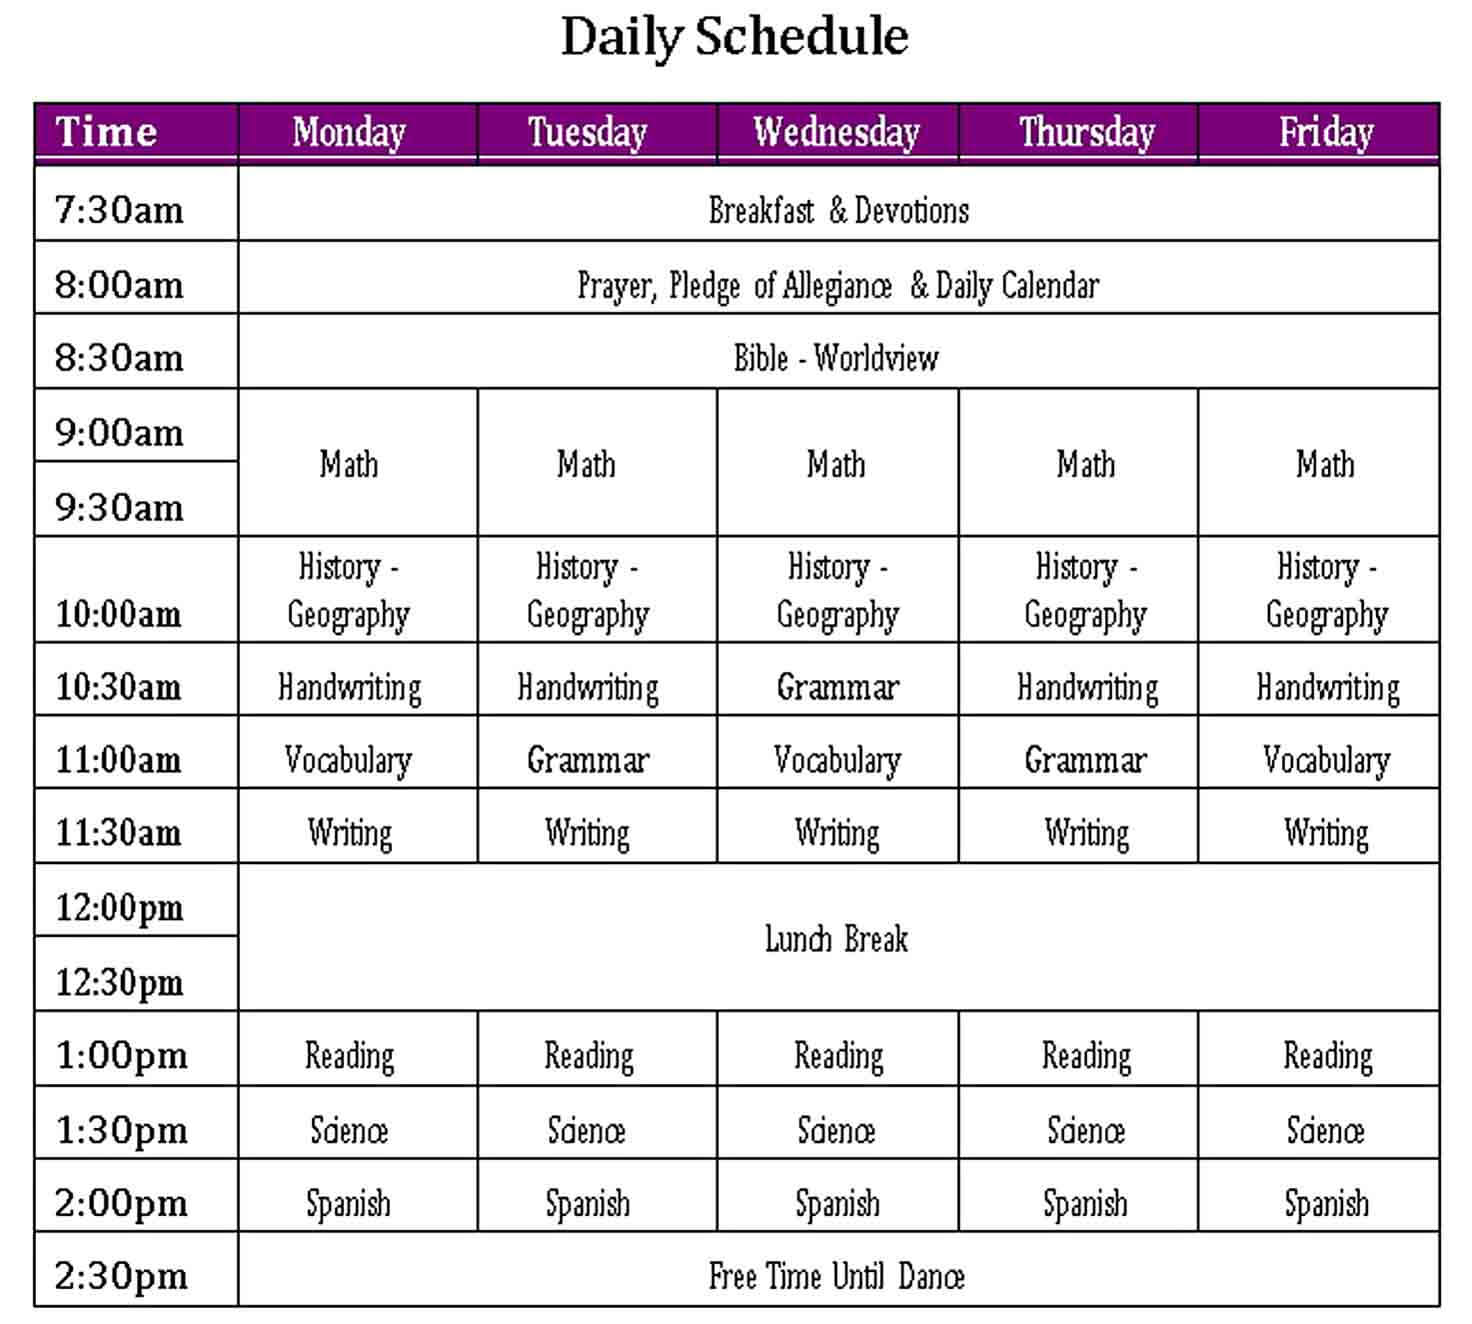 Daily Schedule 1